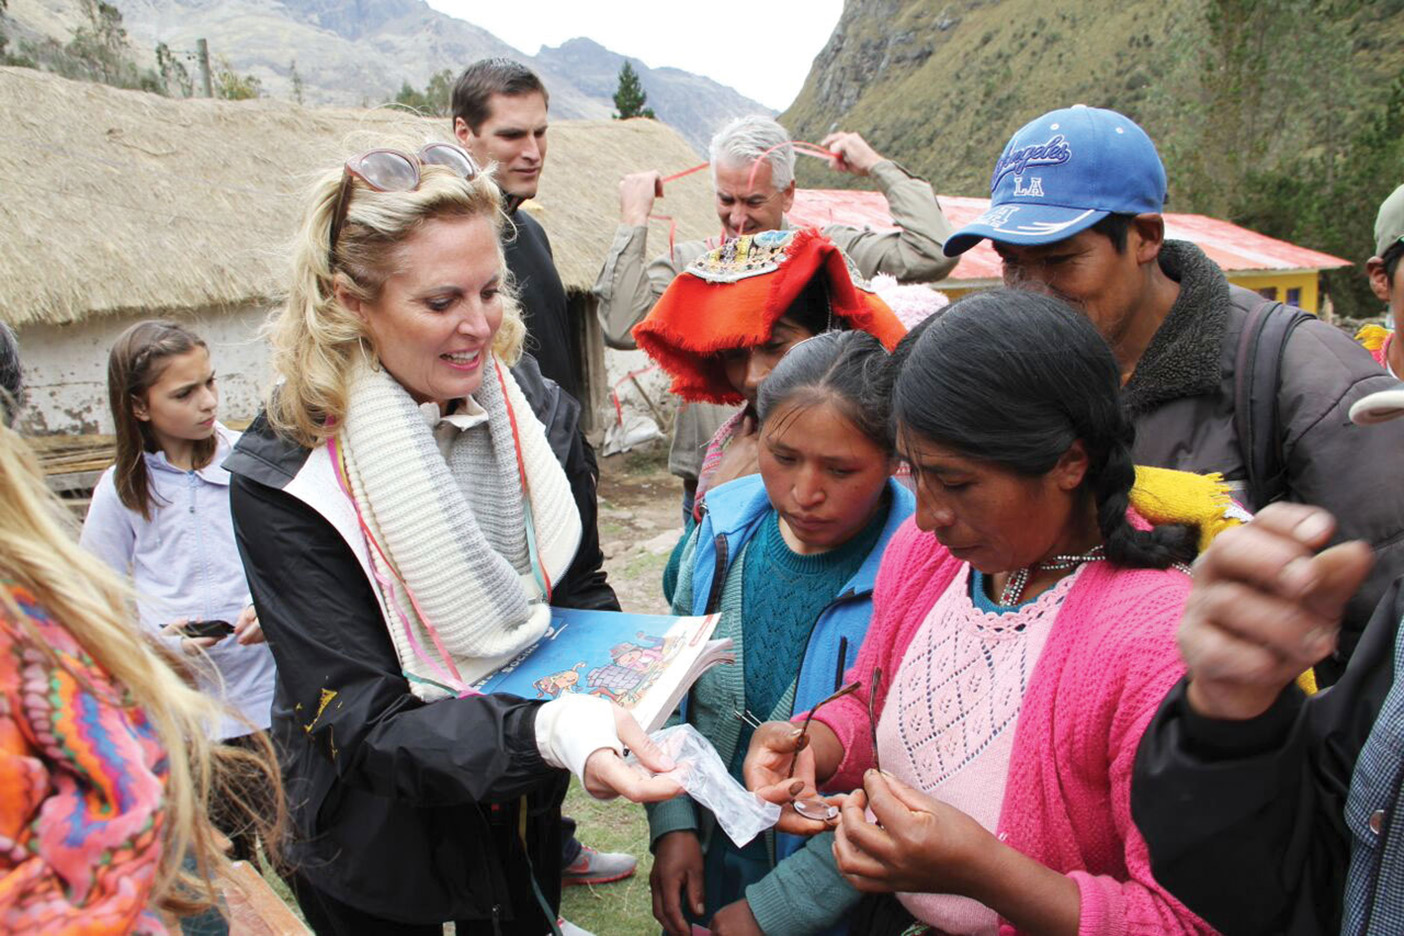 Ann Romney in Peru doing relief work and talking to locals.